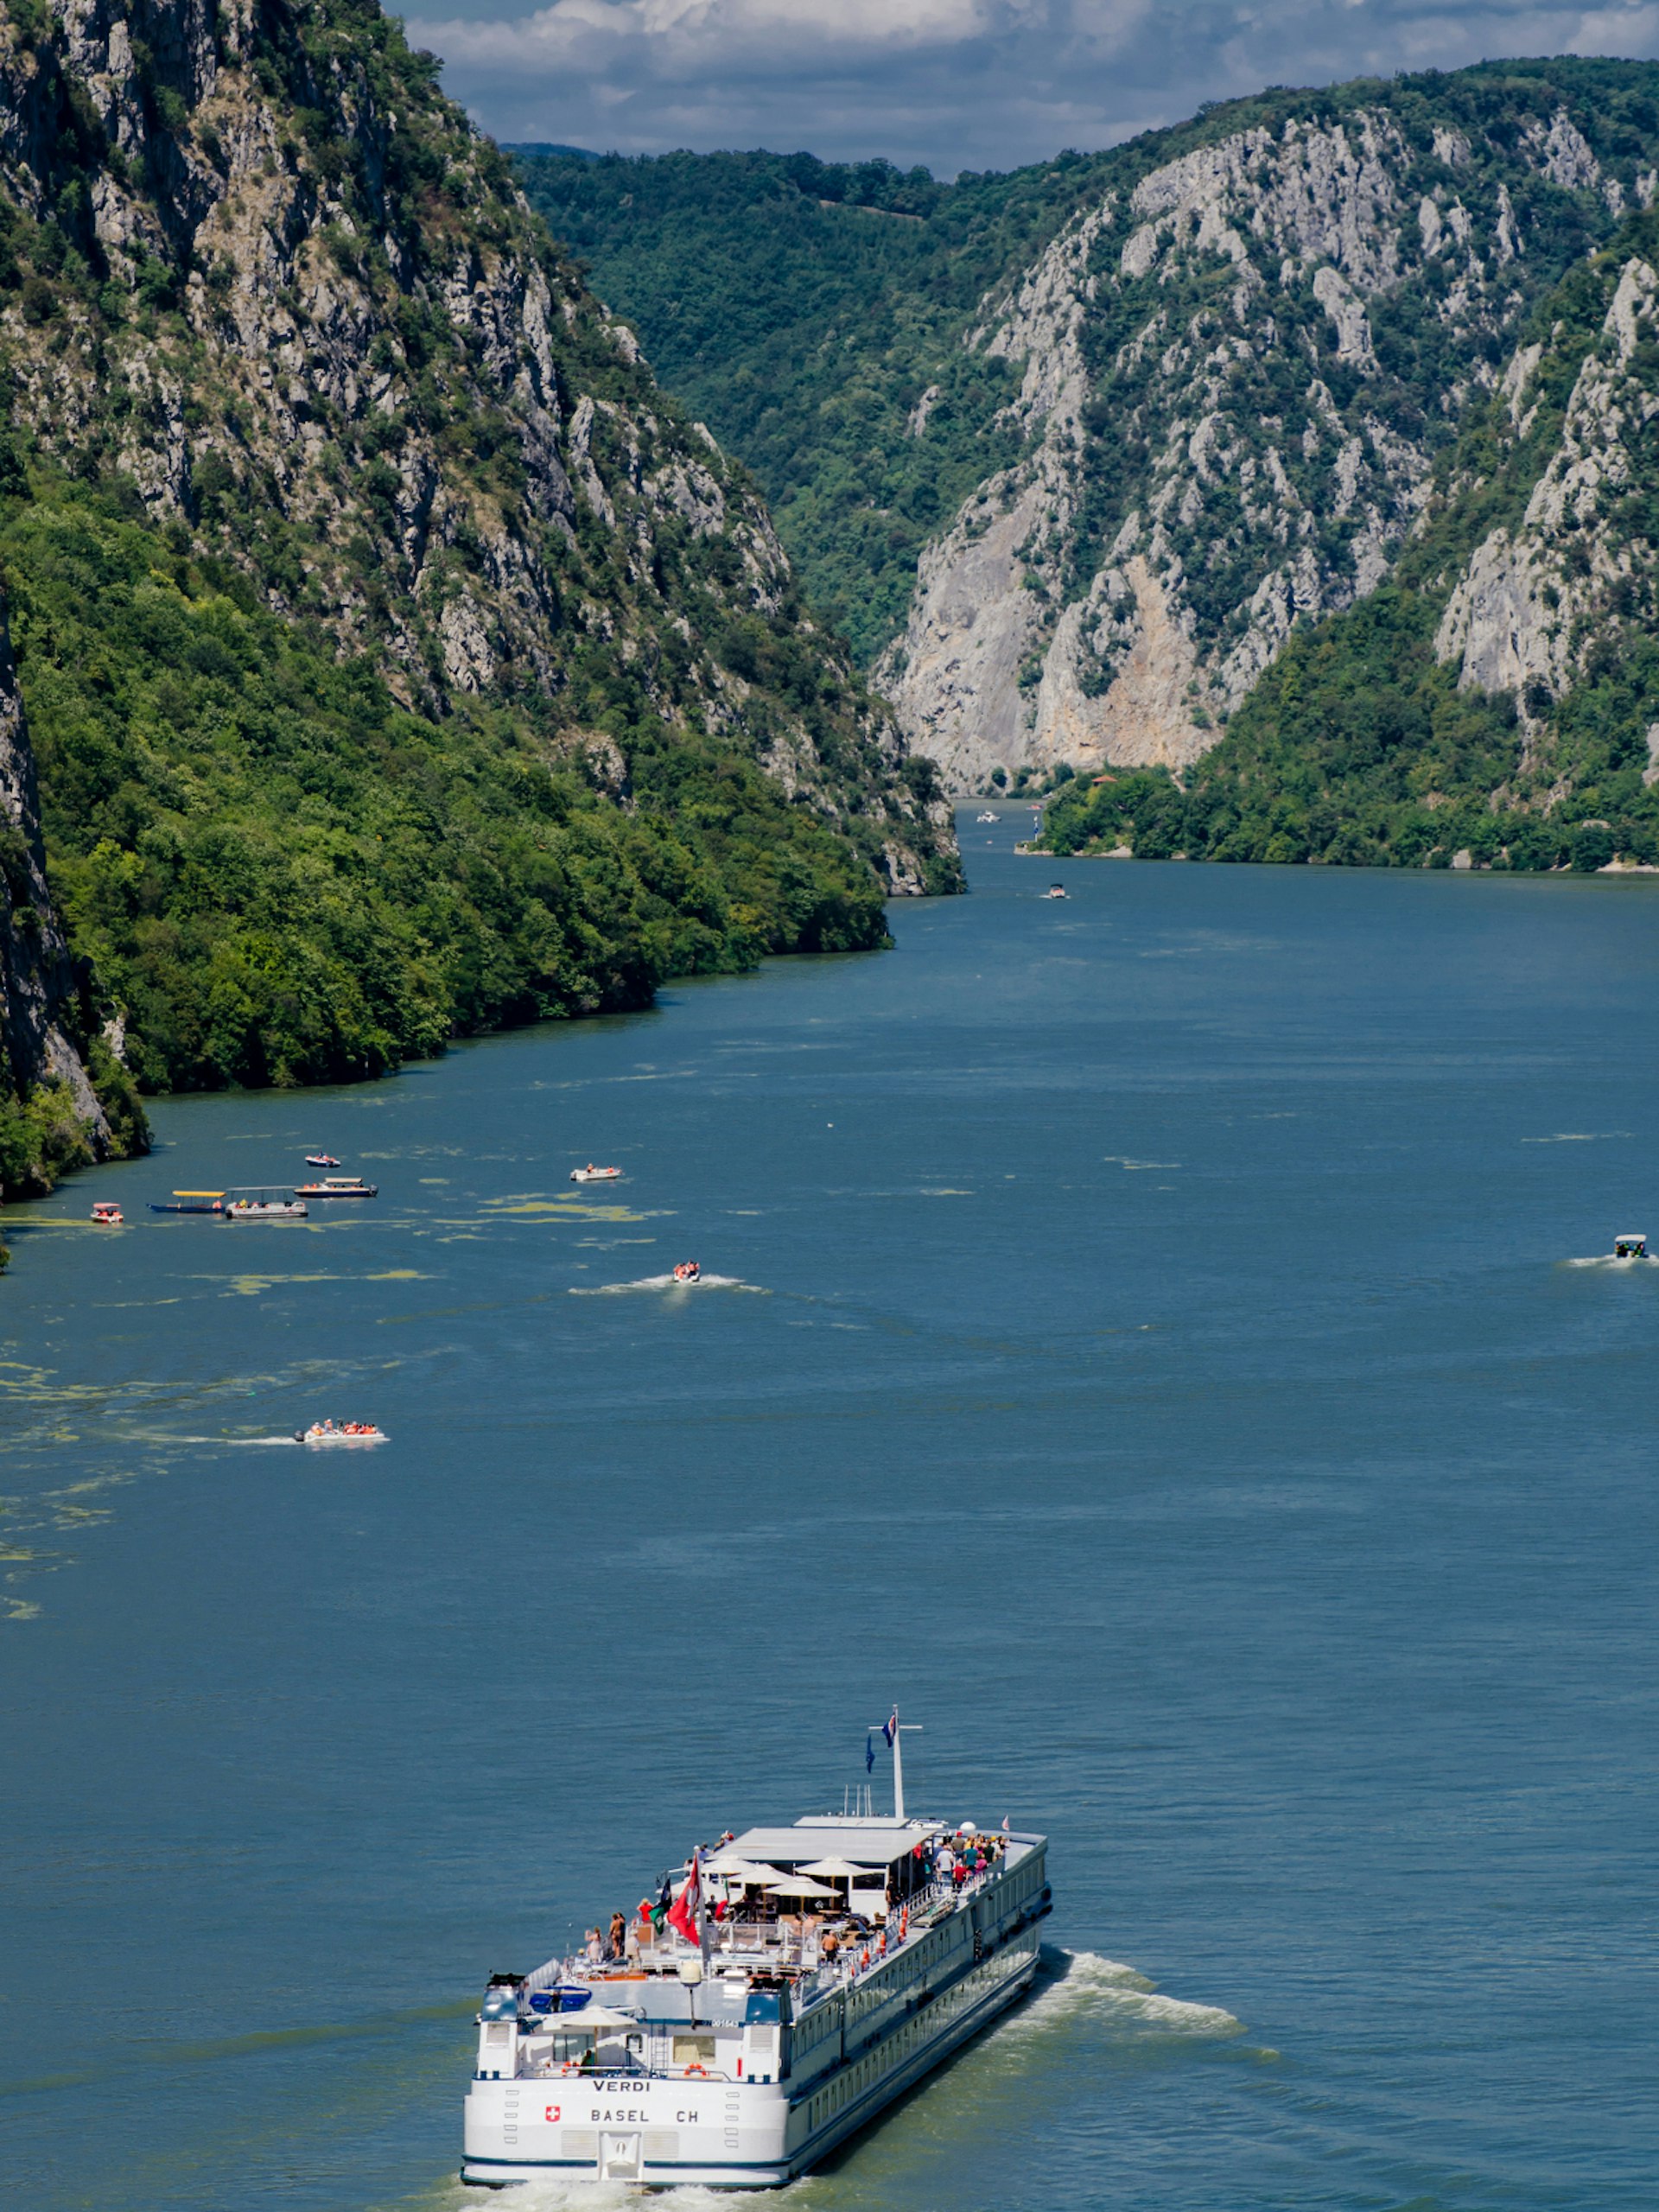 Cruise ships, small boats and speedboats glide down the Danube through the spectacular Iron Gates gorge © perspectivestock / Shutterstock